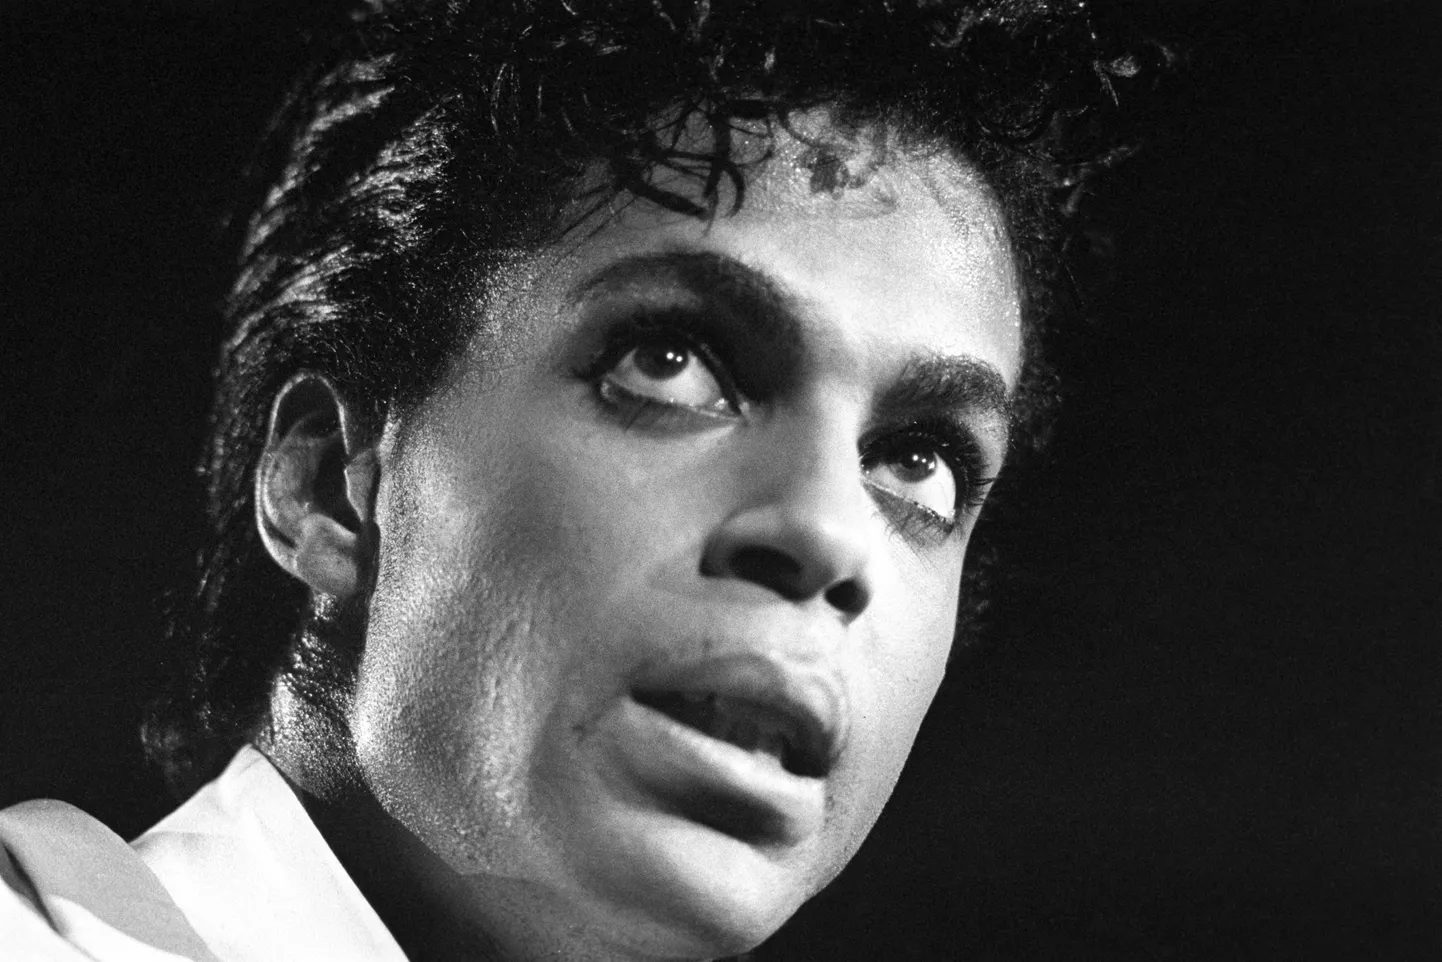 File photo dated 12/08/86 of Prince Rogers Nelson, known by his mononym Prince, who has died at the age of 57 at his Paisley Park compound in Minnesota, according to celebrity website TMZ.